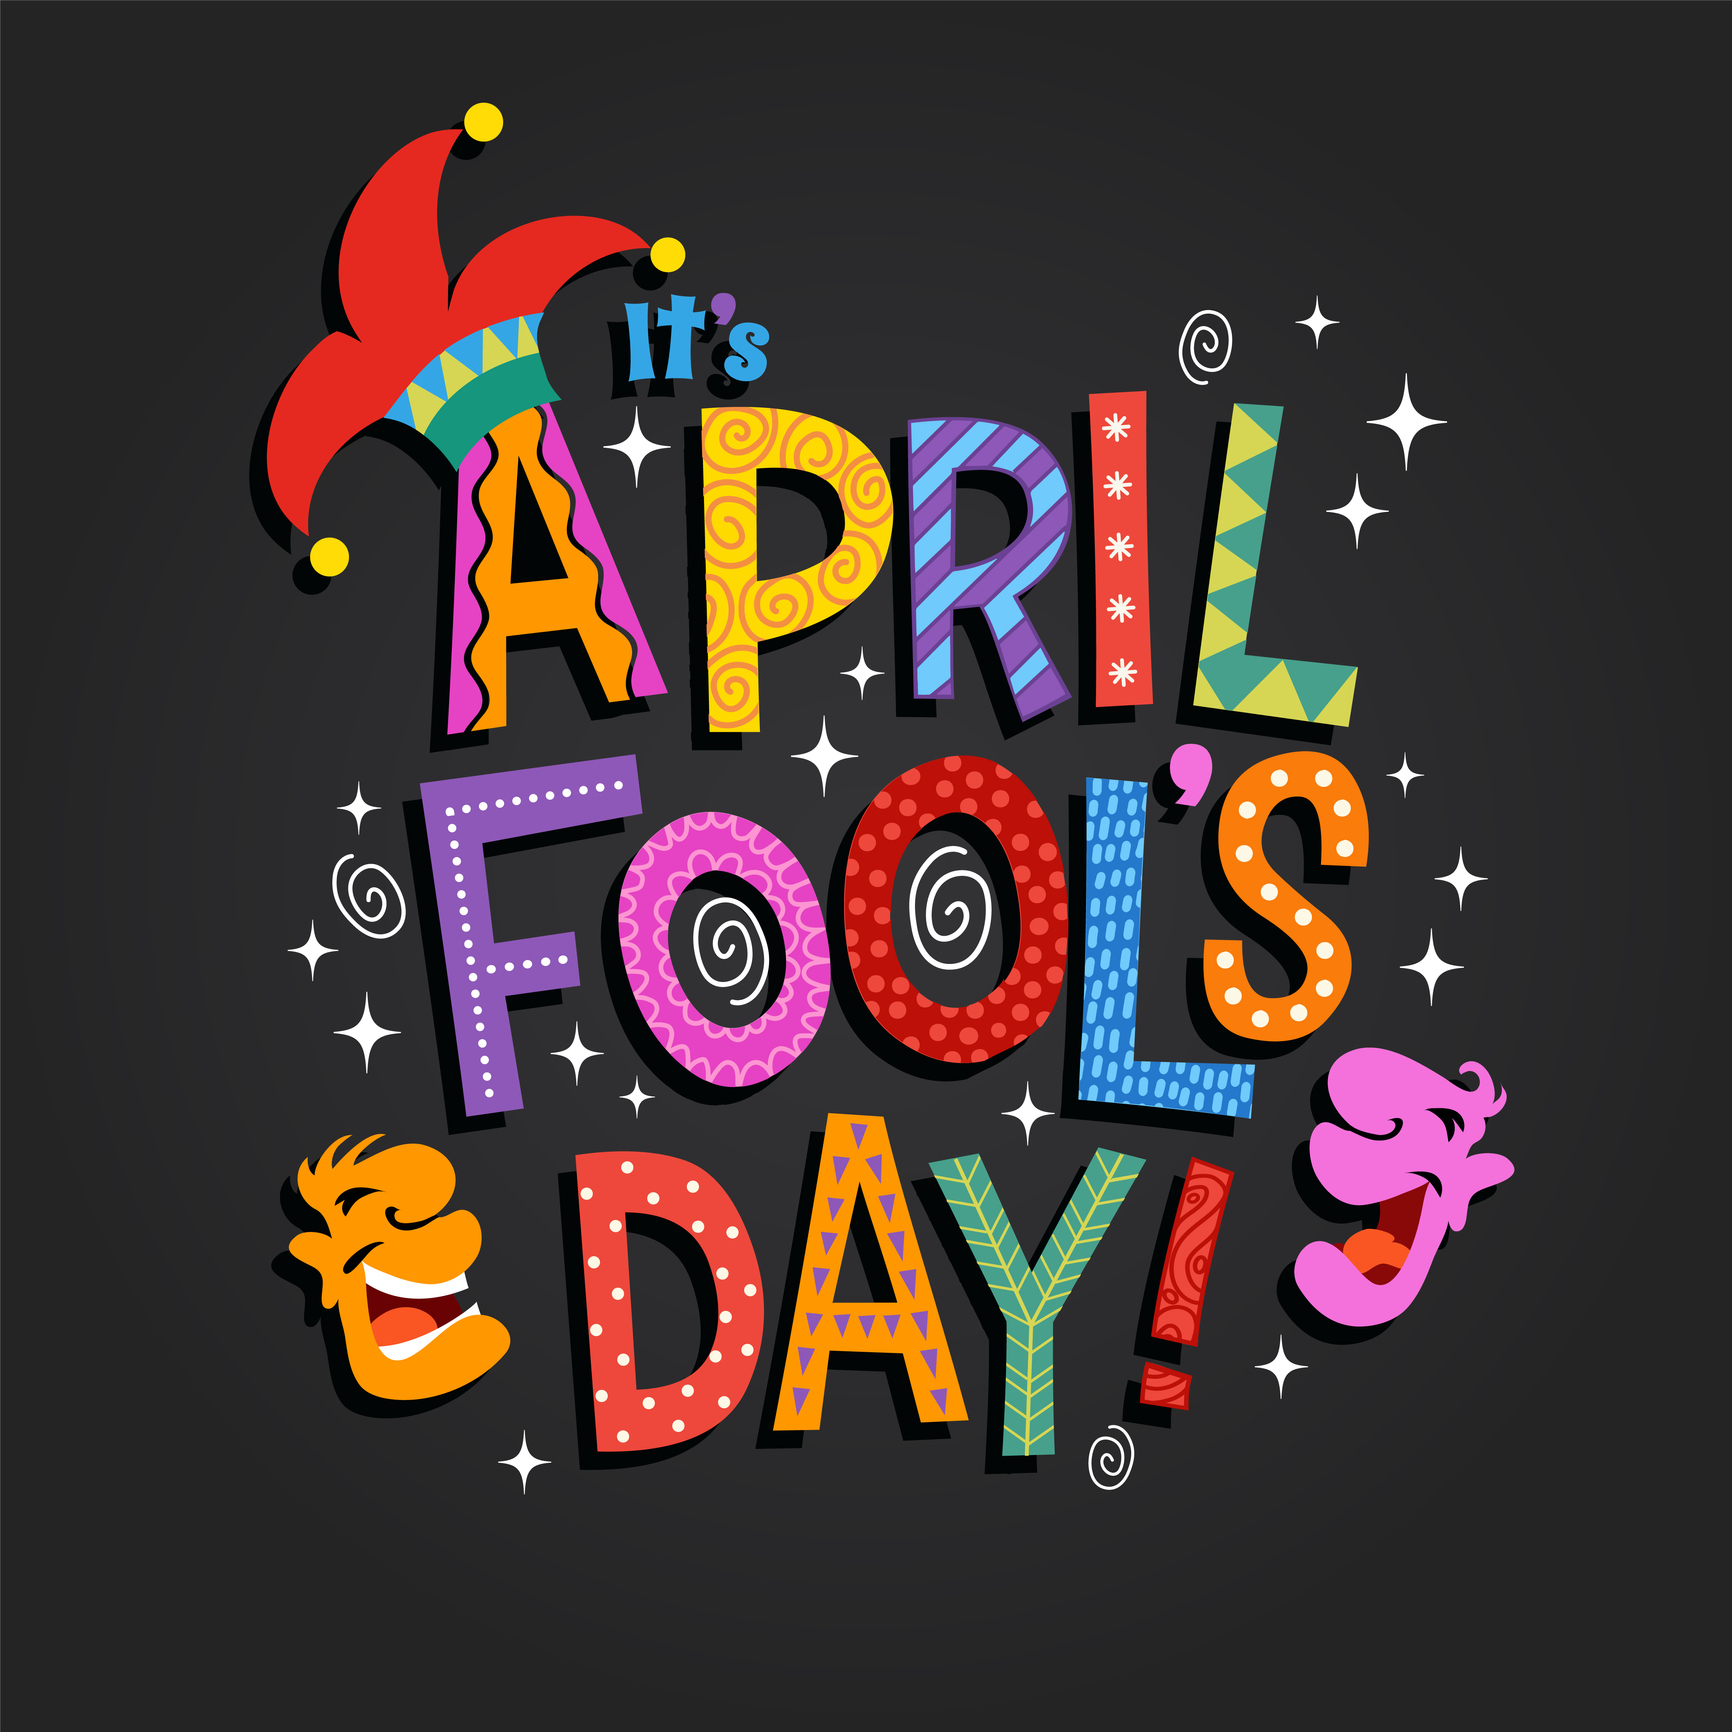 Do You Like April Fools Day?